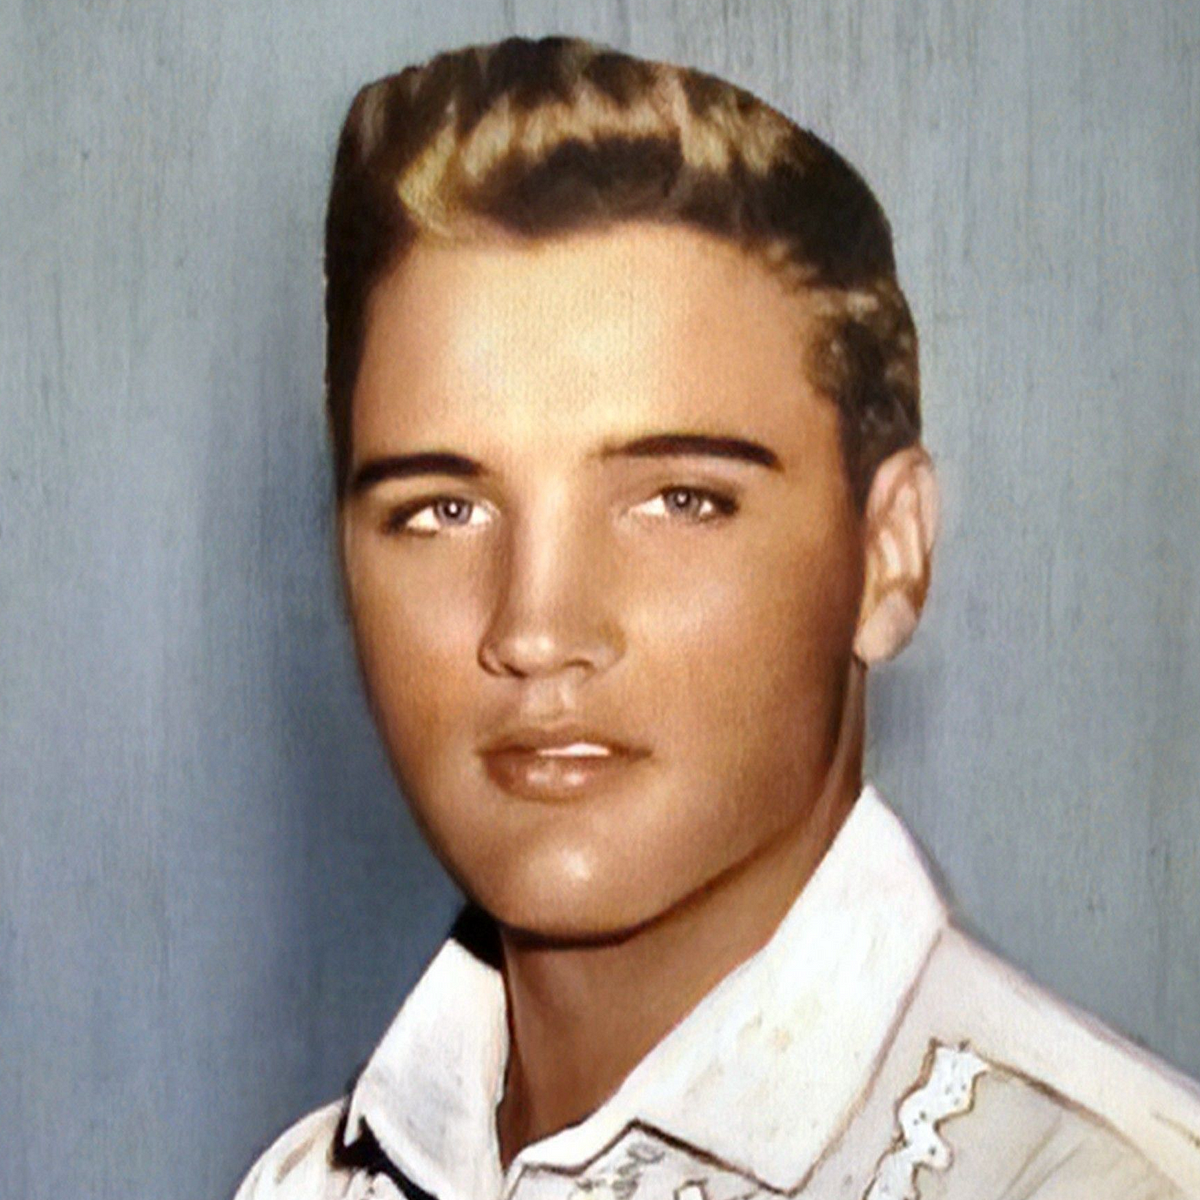 The sexuality of Elvis Presley pic pic